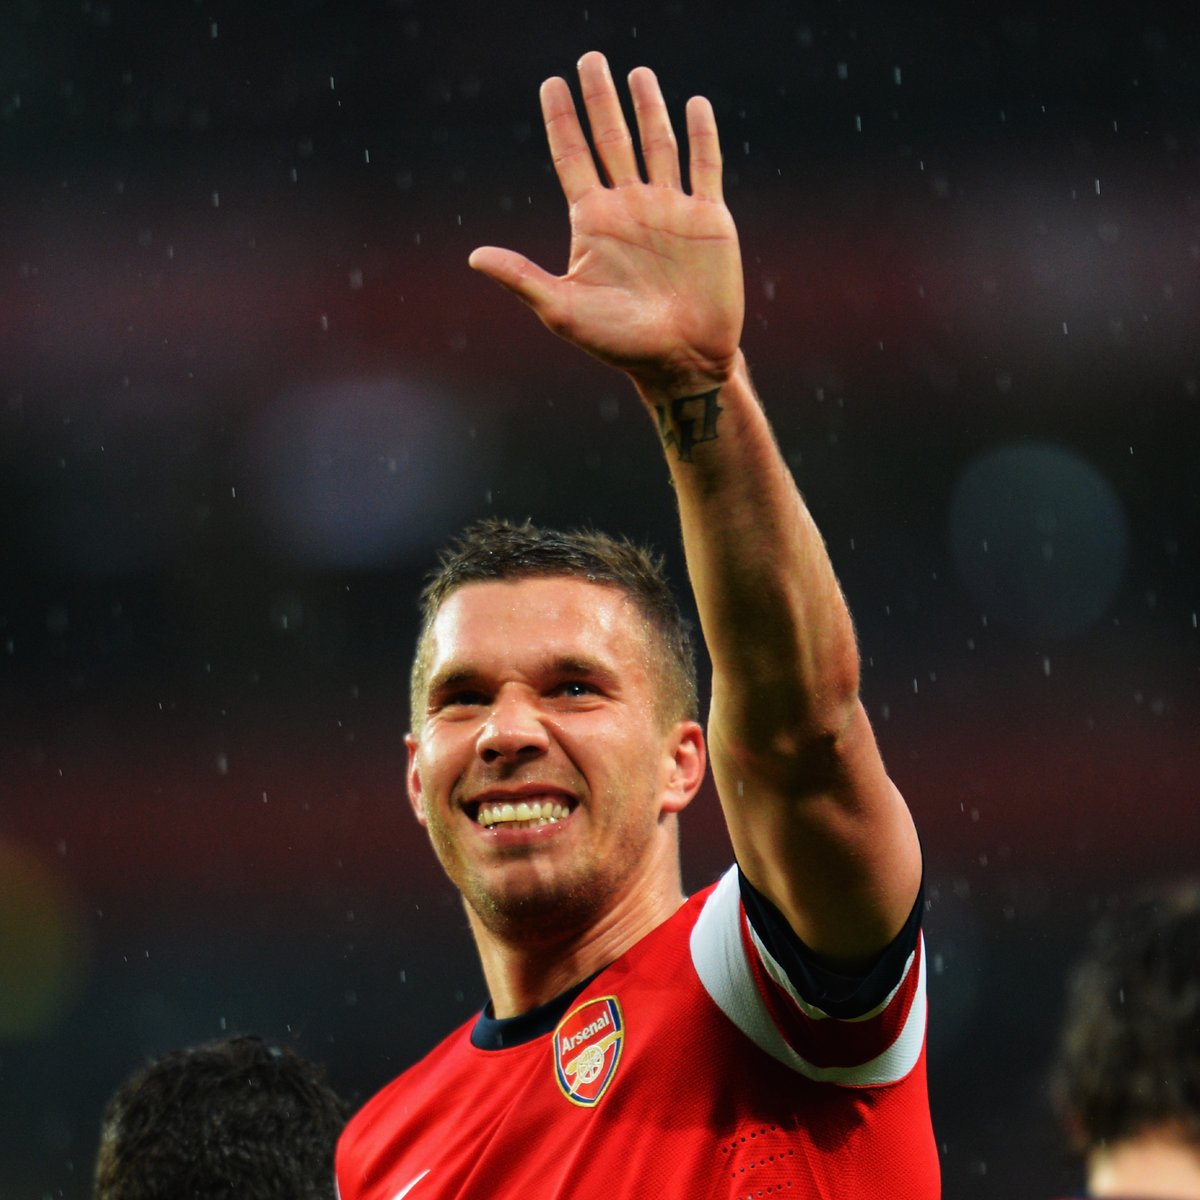 Goal Lukas Podolski An Insult To My Belief Football Is Happiness Freedom Passion Fans And Is For Everyone This Project Is Disgusting Not Fair And I M Disappointed To See